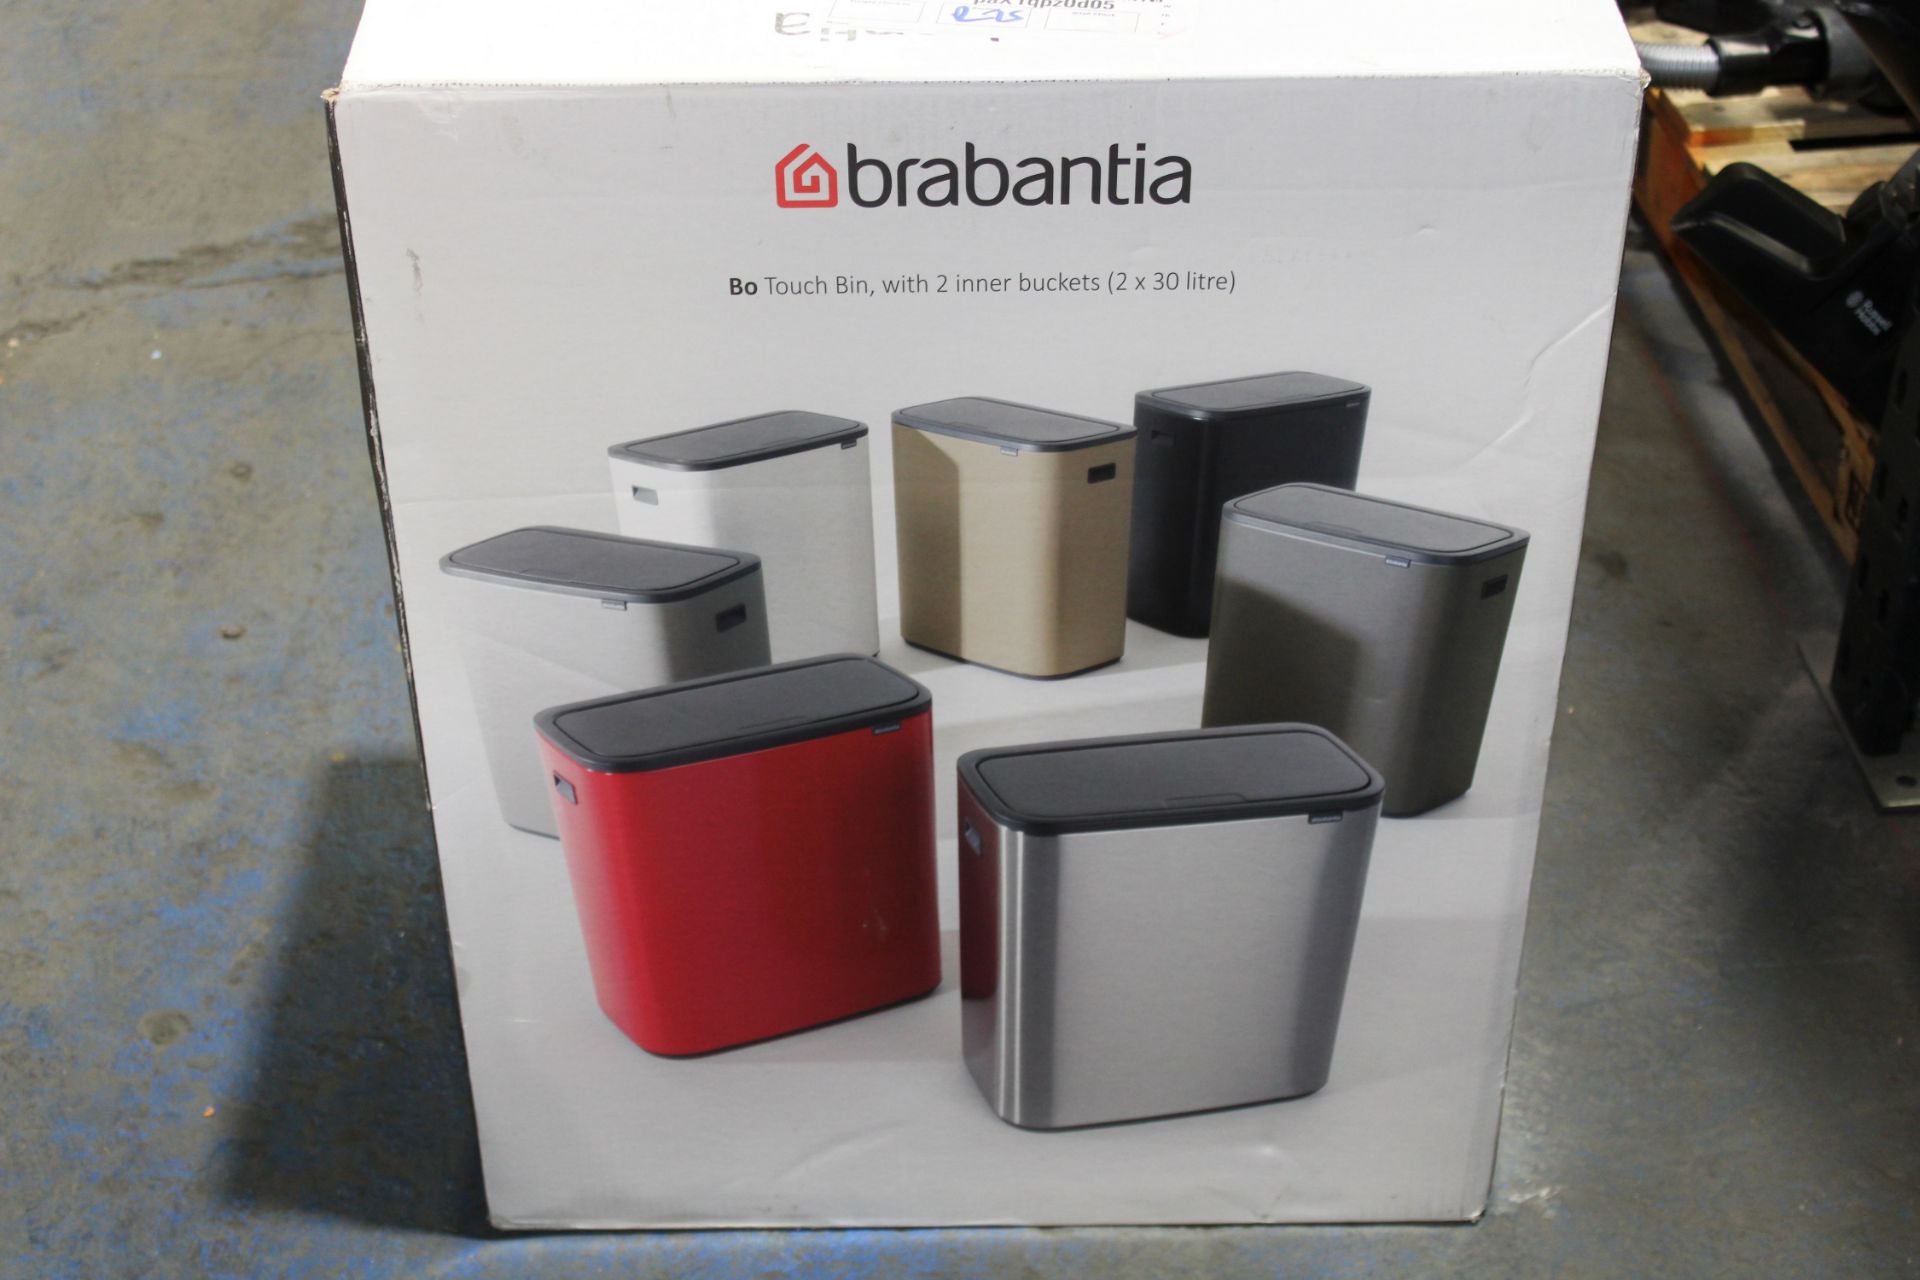 BOXED BRABANTIA BO PEDAL BIN, WITH 2 INNER BUCKETS (2X 30LITRES) RRP £185.00Condition